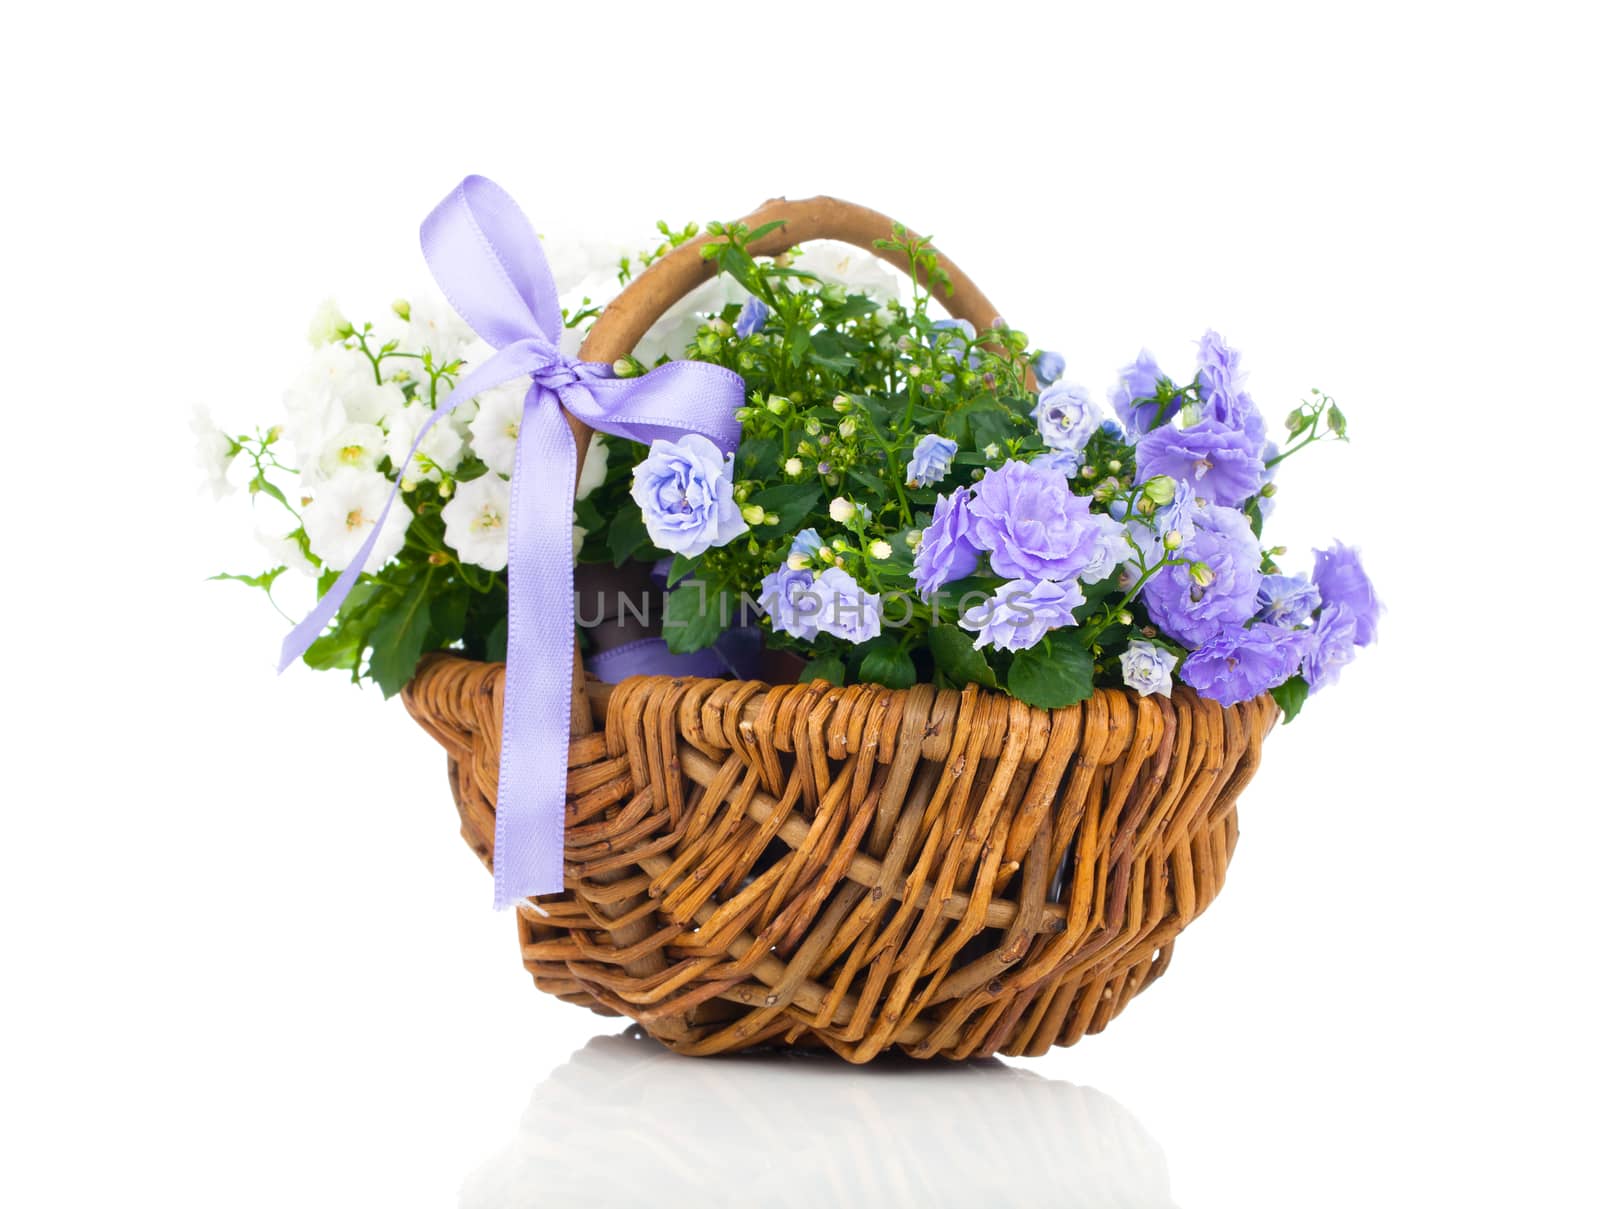 blue and white Campanula terry flowers in the wicker basket, isolated on white background